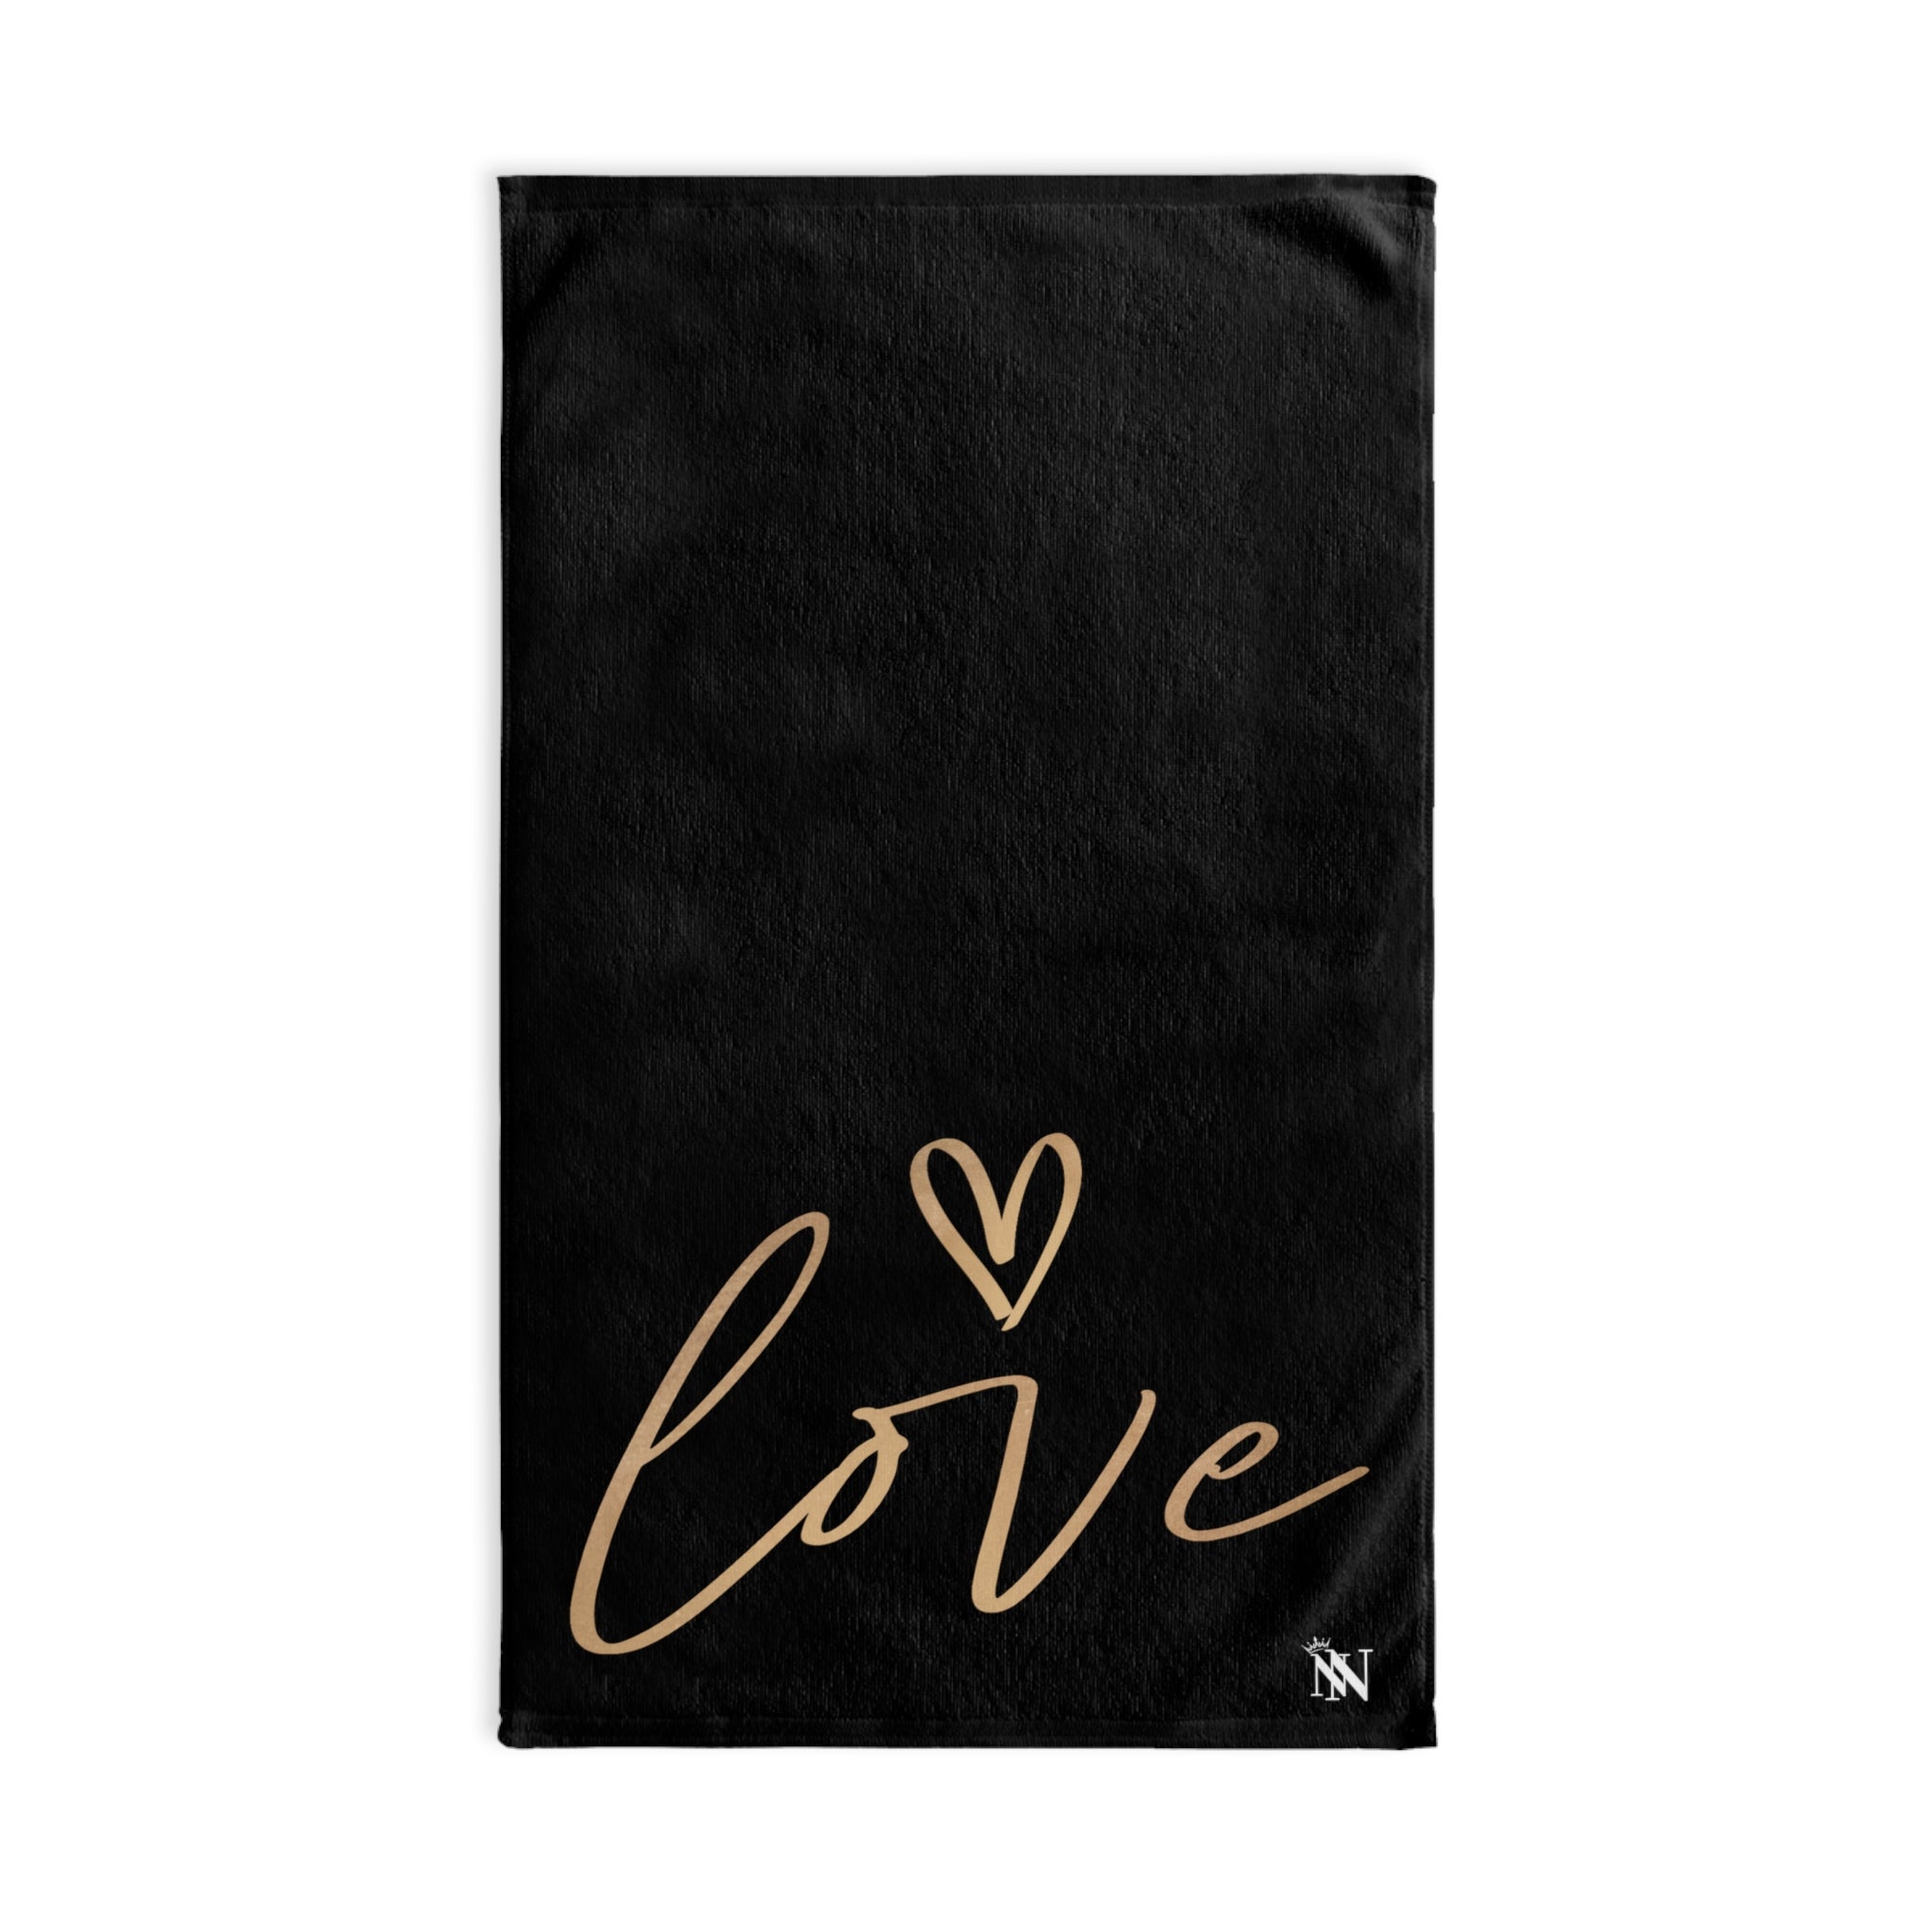 Gold Love Heart Black | Sexy Gifts for Boyfriend, Funny Towel Romantic Gift for Wedding Couple Fiance First Year 2nd Anniversary Valentines, Party Gag Gifts, Joke Humor Cloth for Husband Men BF NECTAR NAPKINS